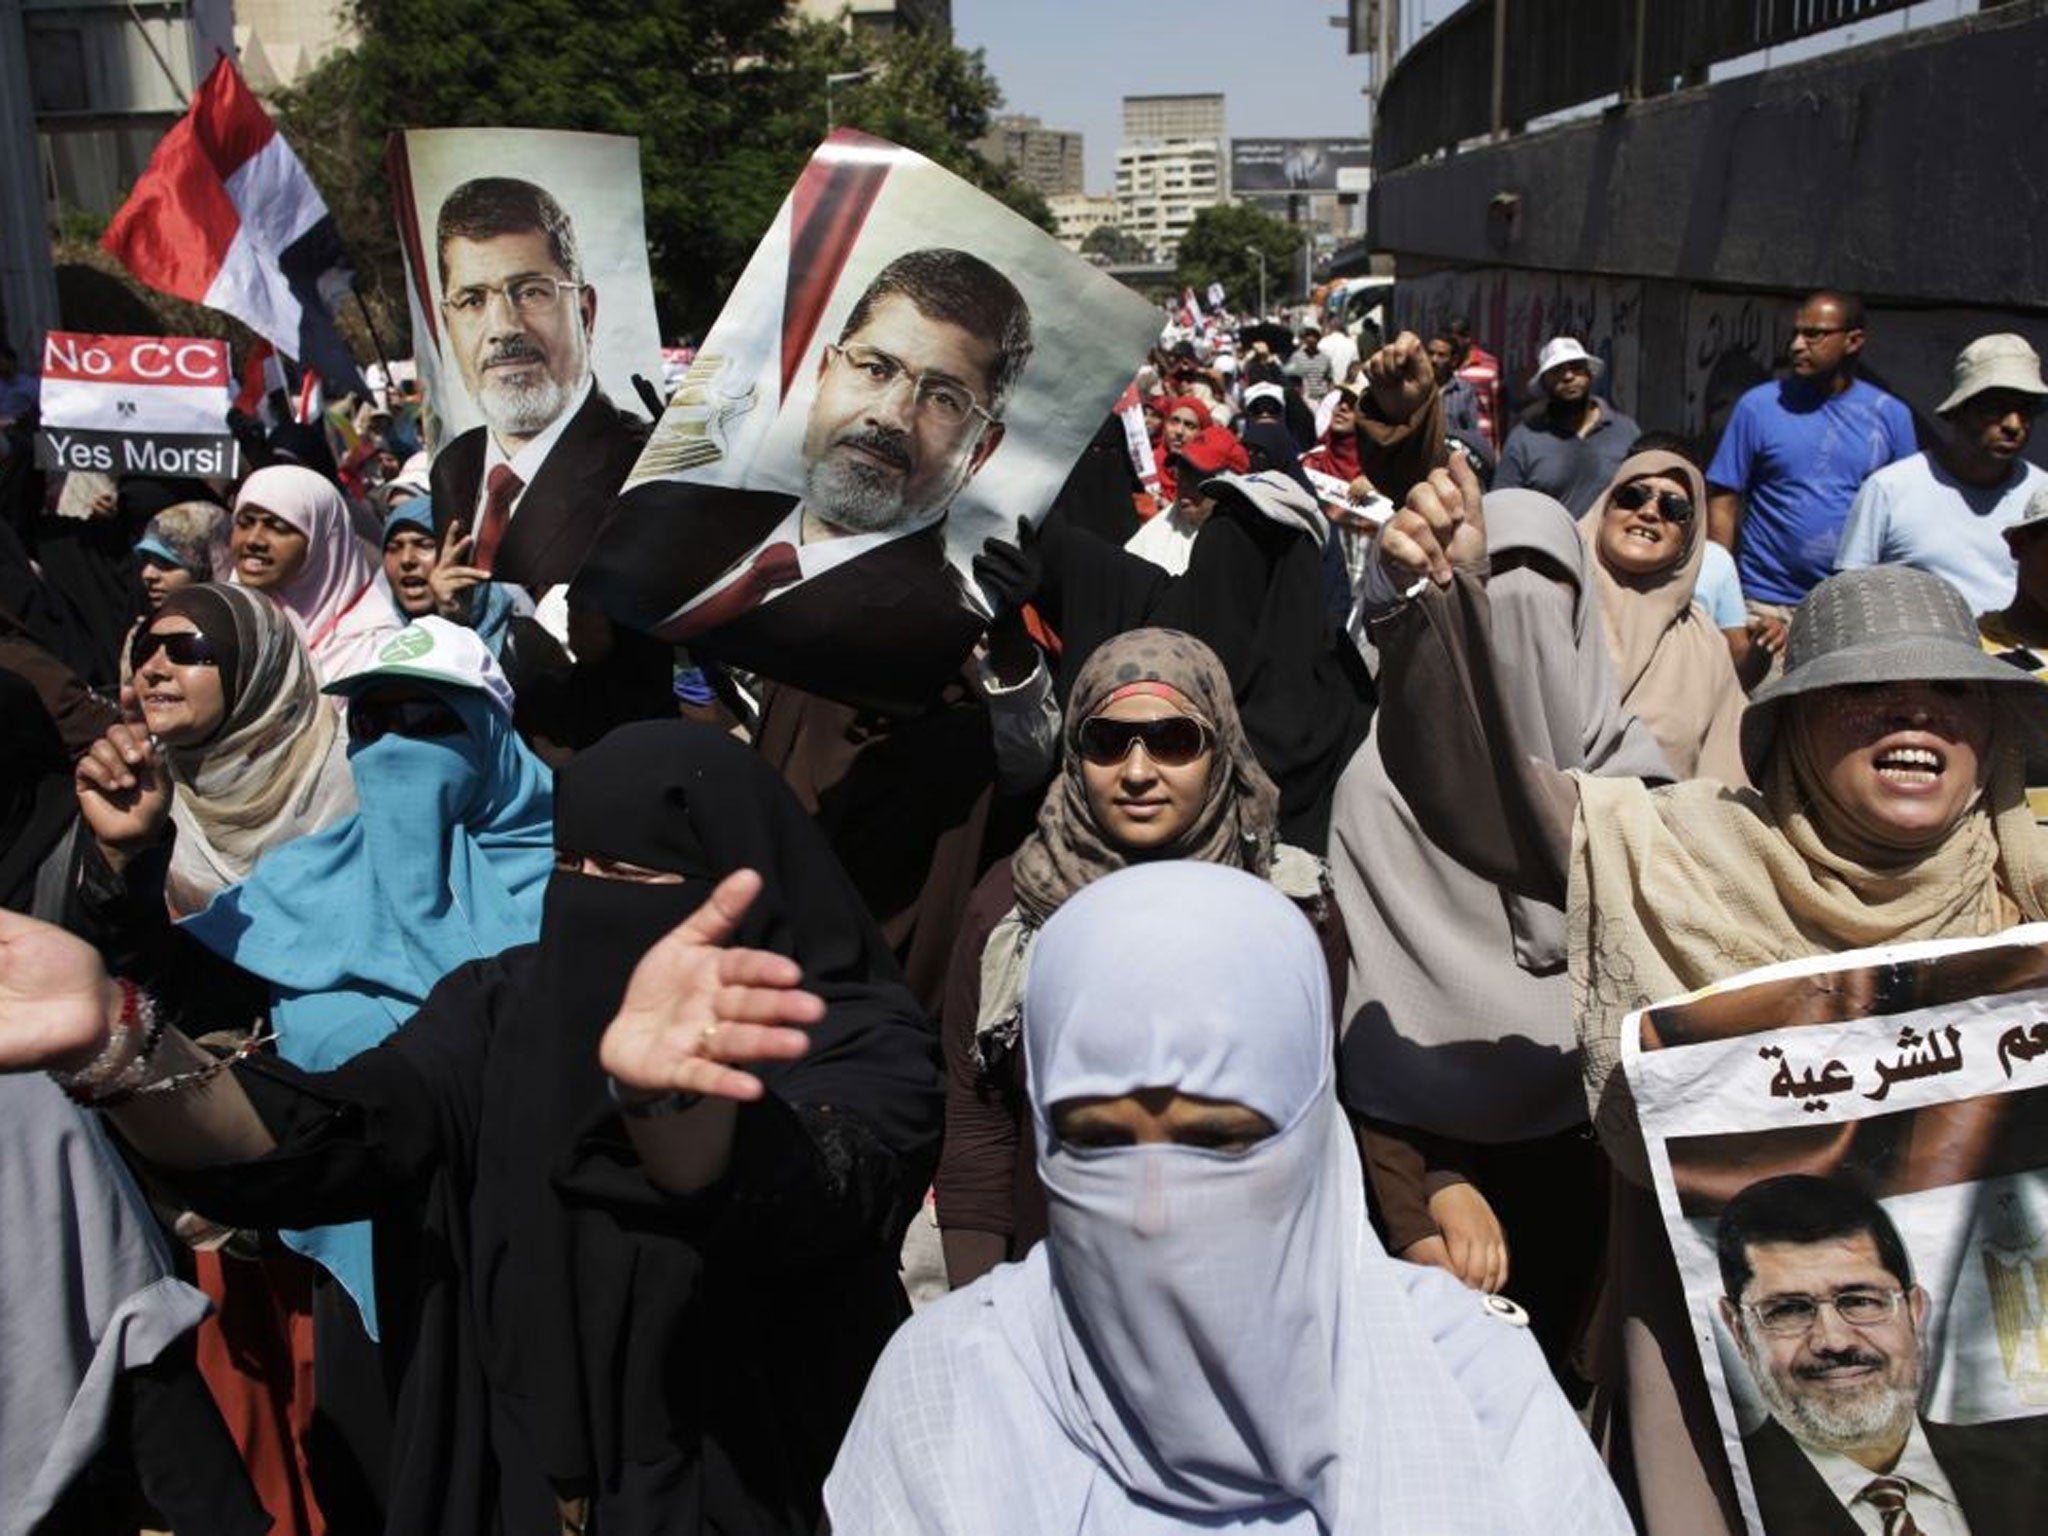 Supporters of Egypt's ousted president Mohammed Morsi chant slogans as they march through Cairo